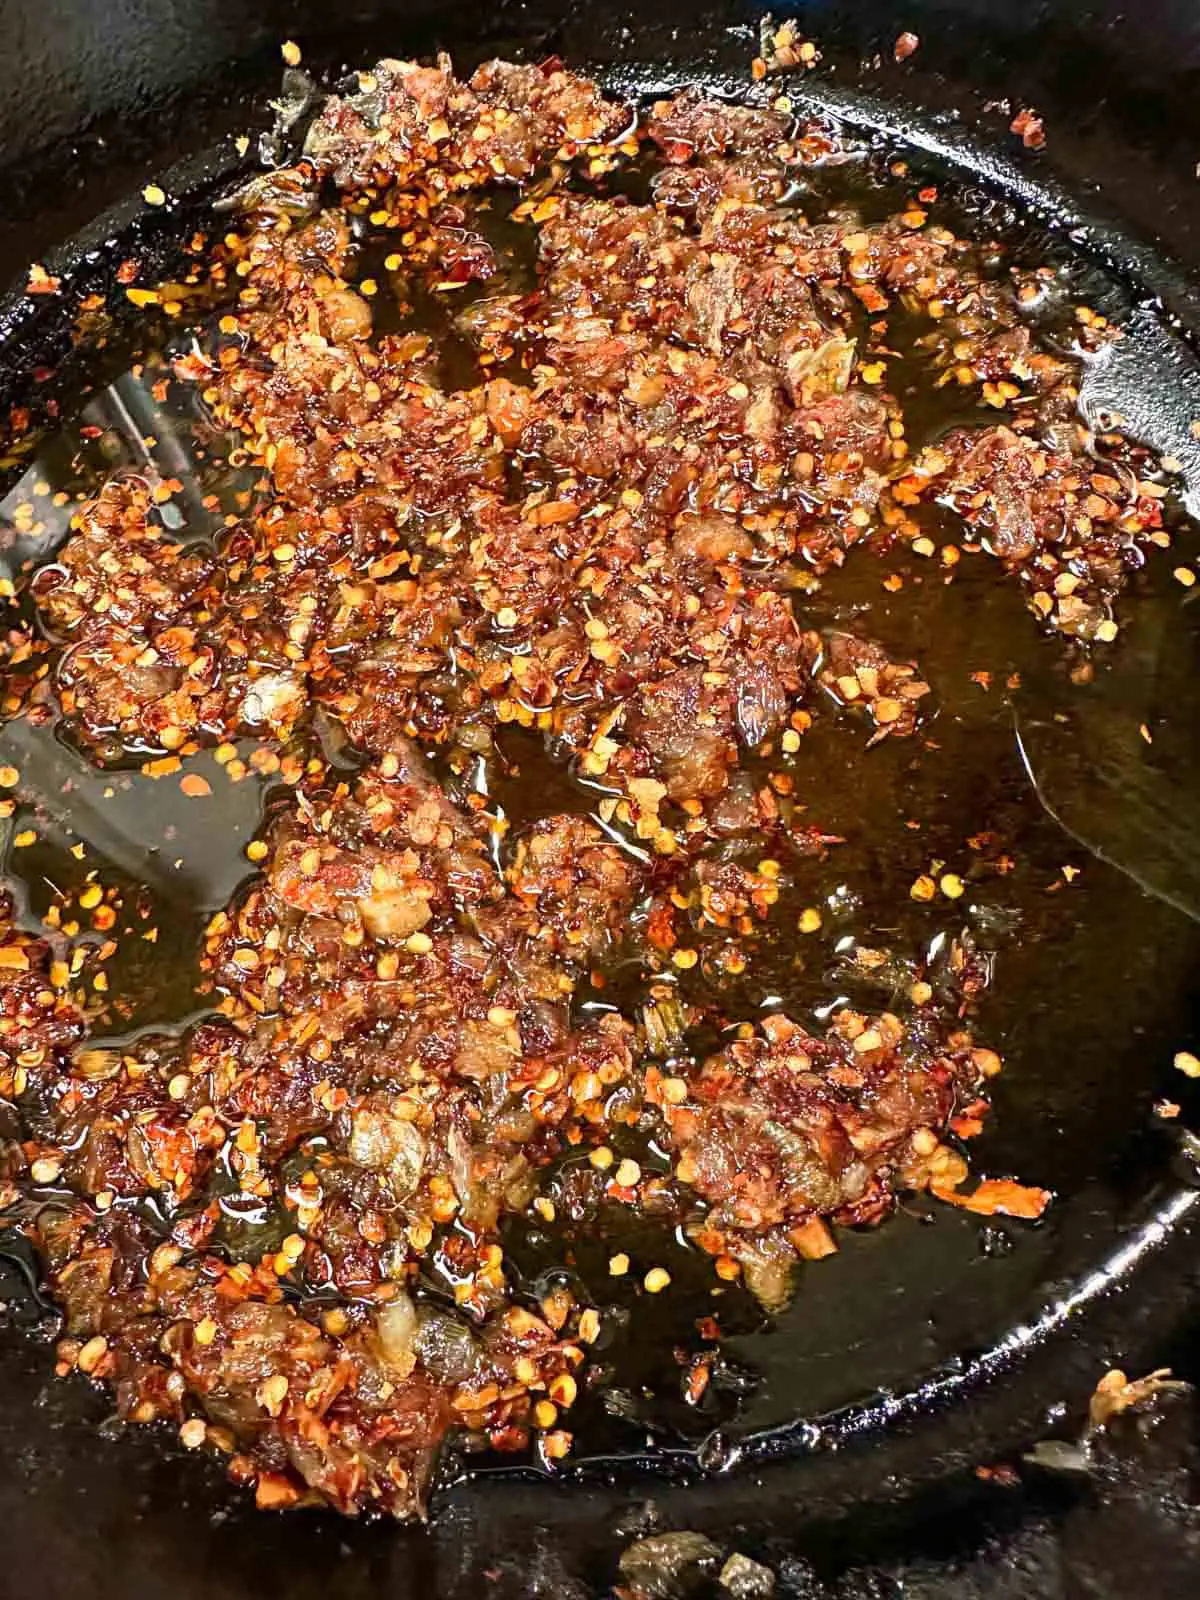 Thai chili oil with dried chilies, oil, sautéed garlic and shallots in a skillet.